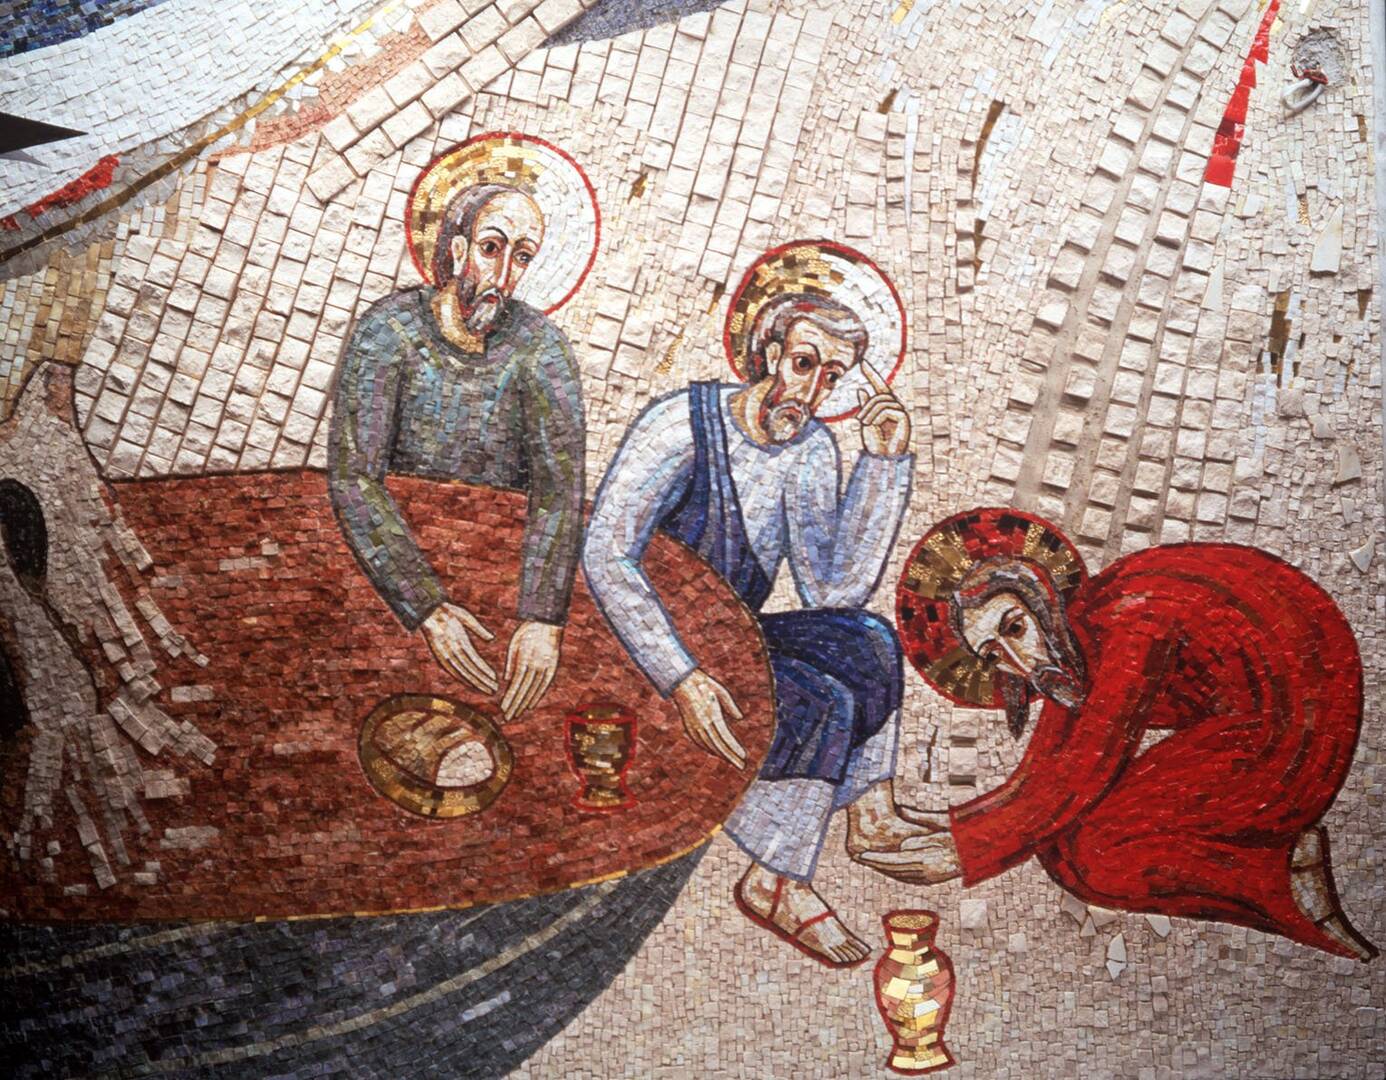 Jesus washes the feet of Peter in a scene from a mosaic by Marko Rupnik, which decorates the Redemptoris Mater Chapel in the Vatican's Apostolic Palace. (CNS photo courtesy Libreria Editrice Vaticana)